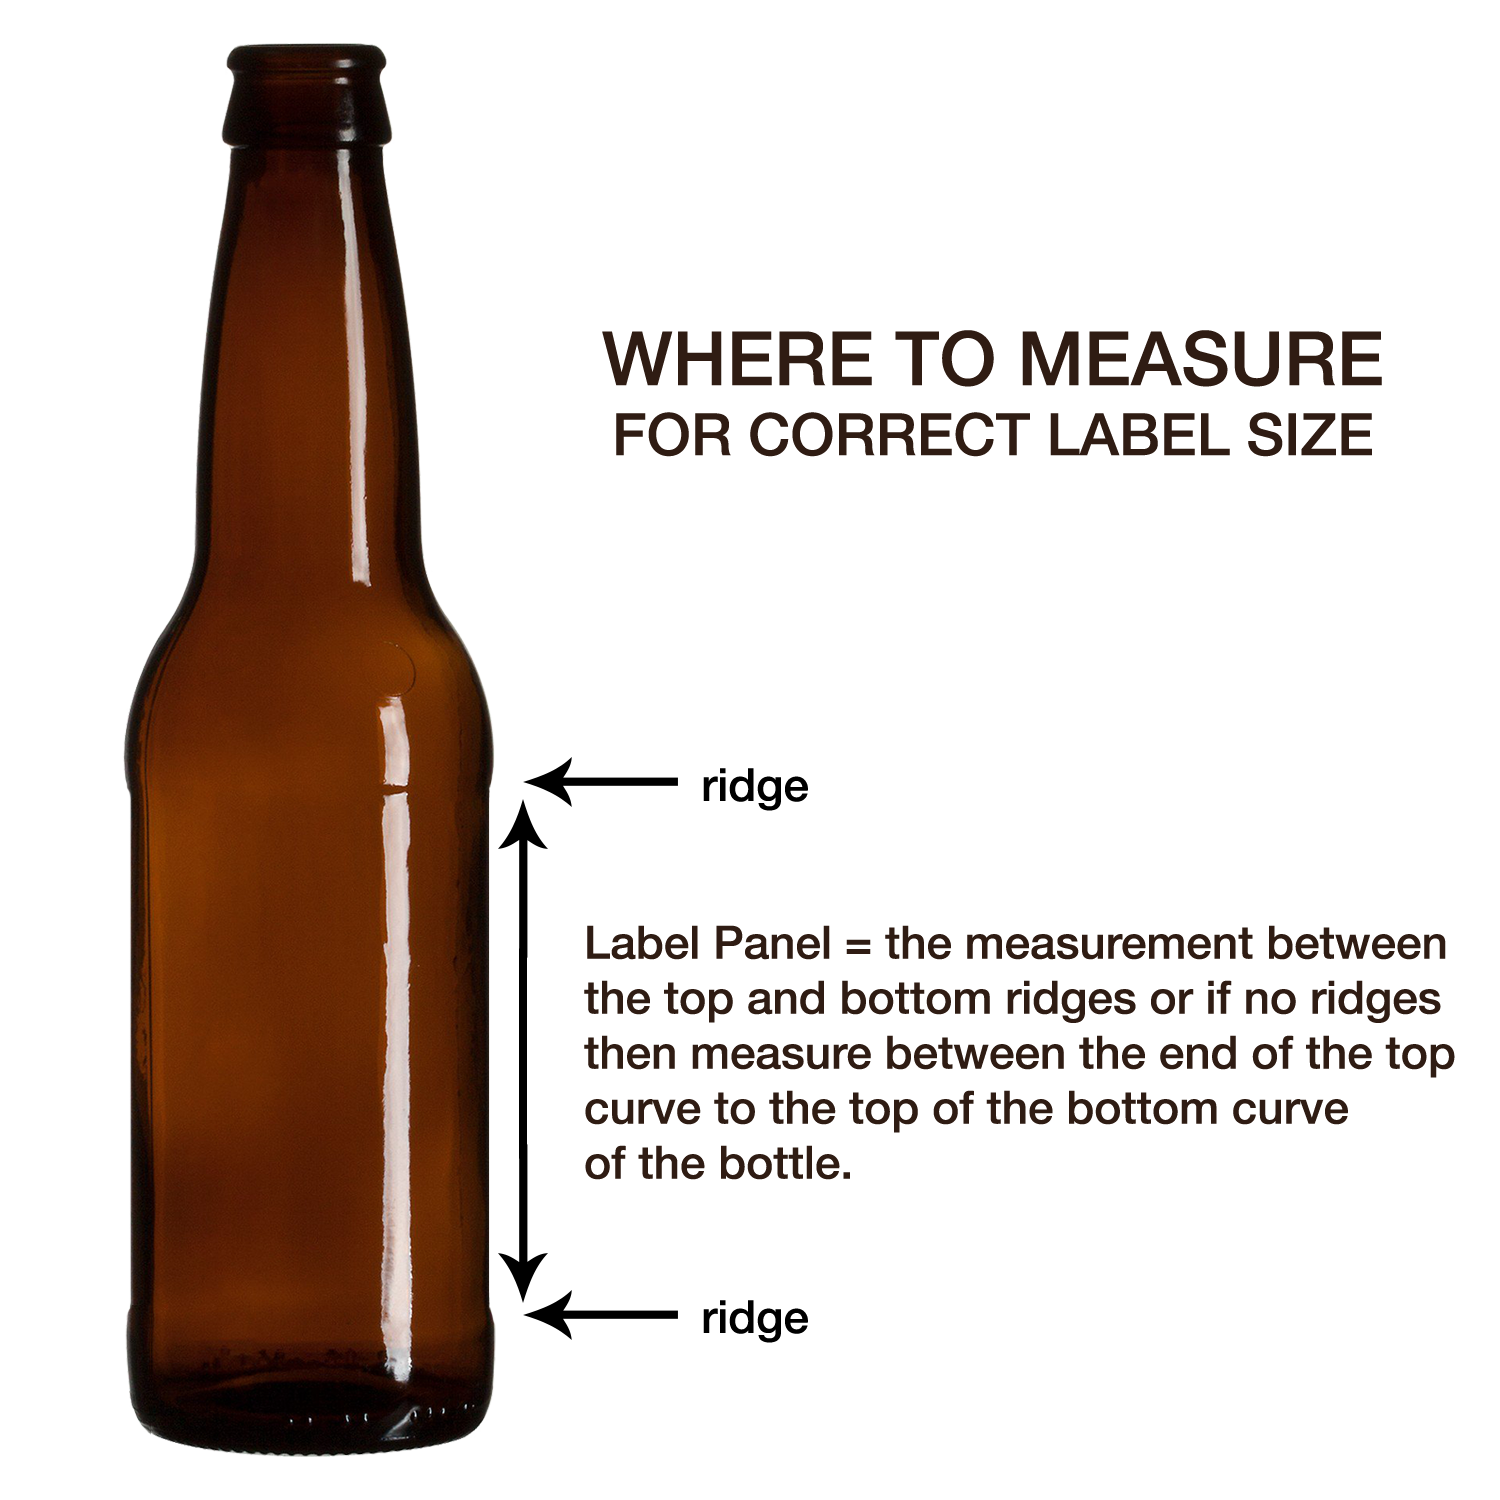 How to measure a beer bottle for a custom label.